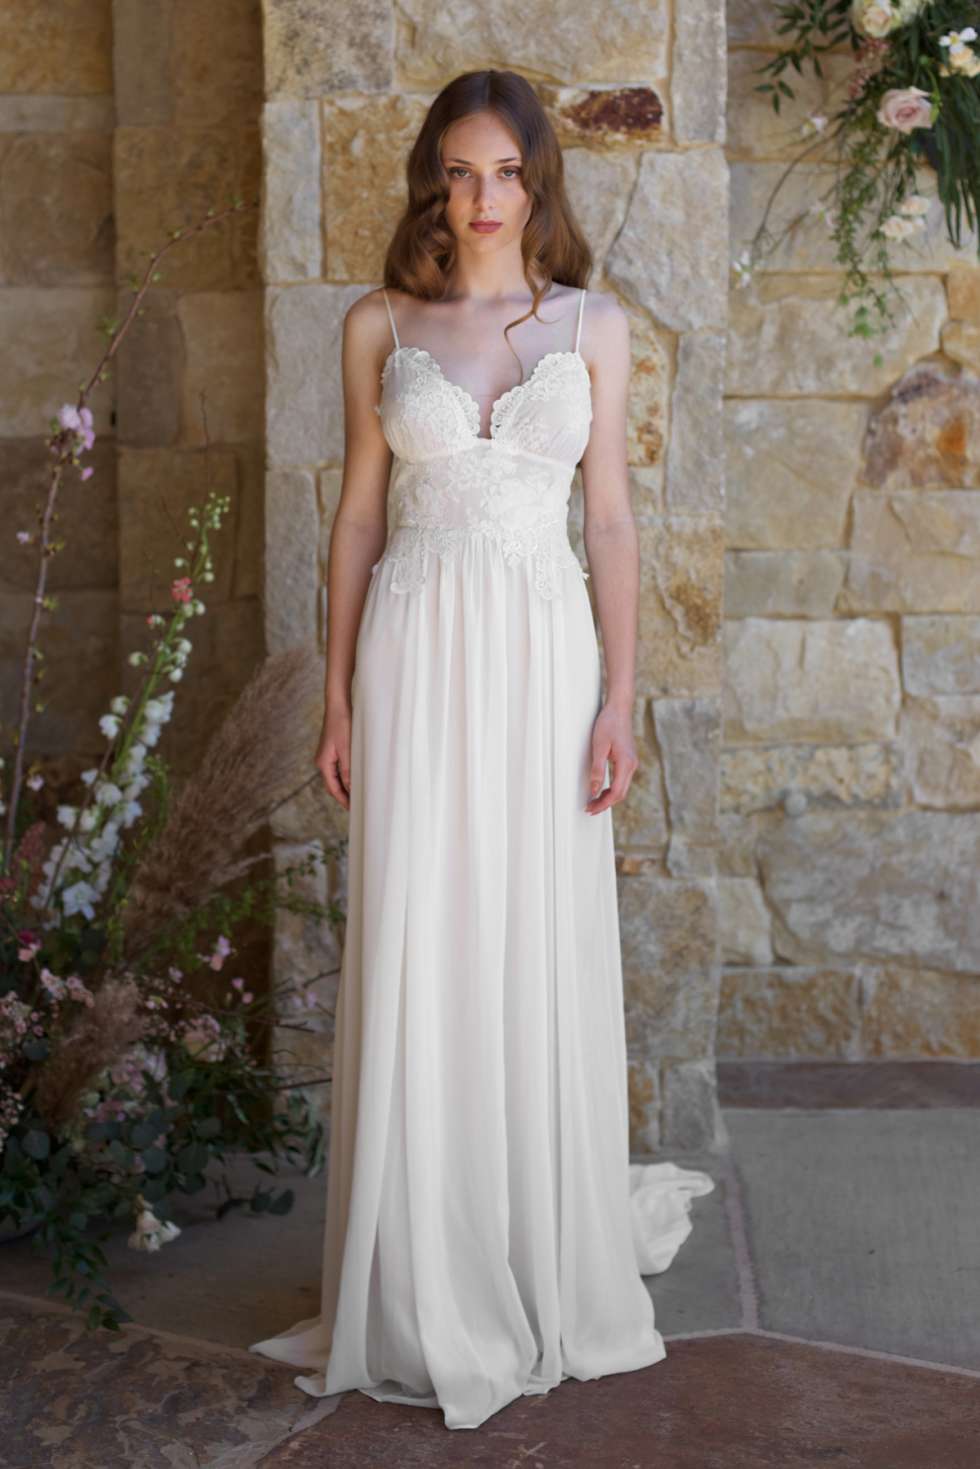 2018 Spring Wedding Dress Collection by Claire Pettibone